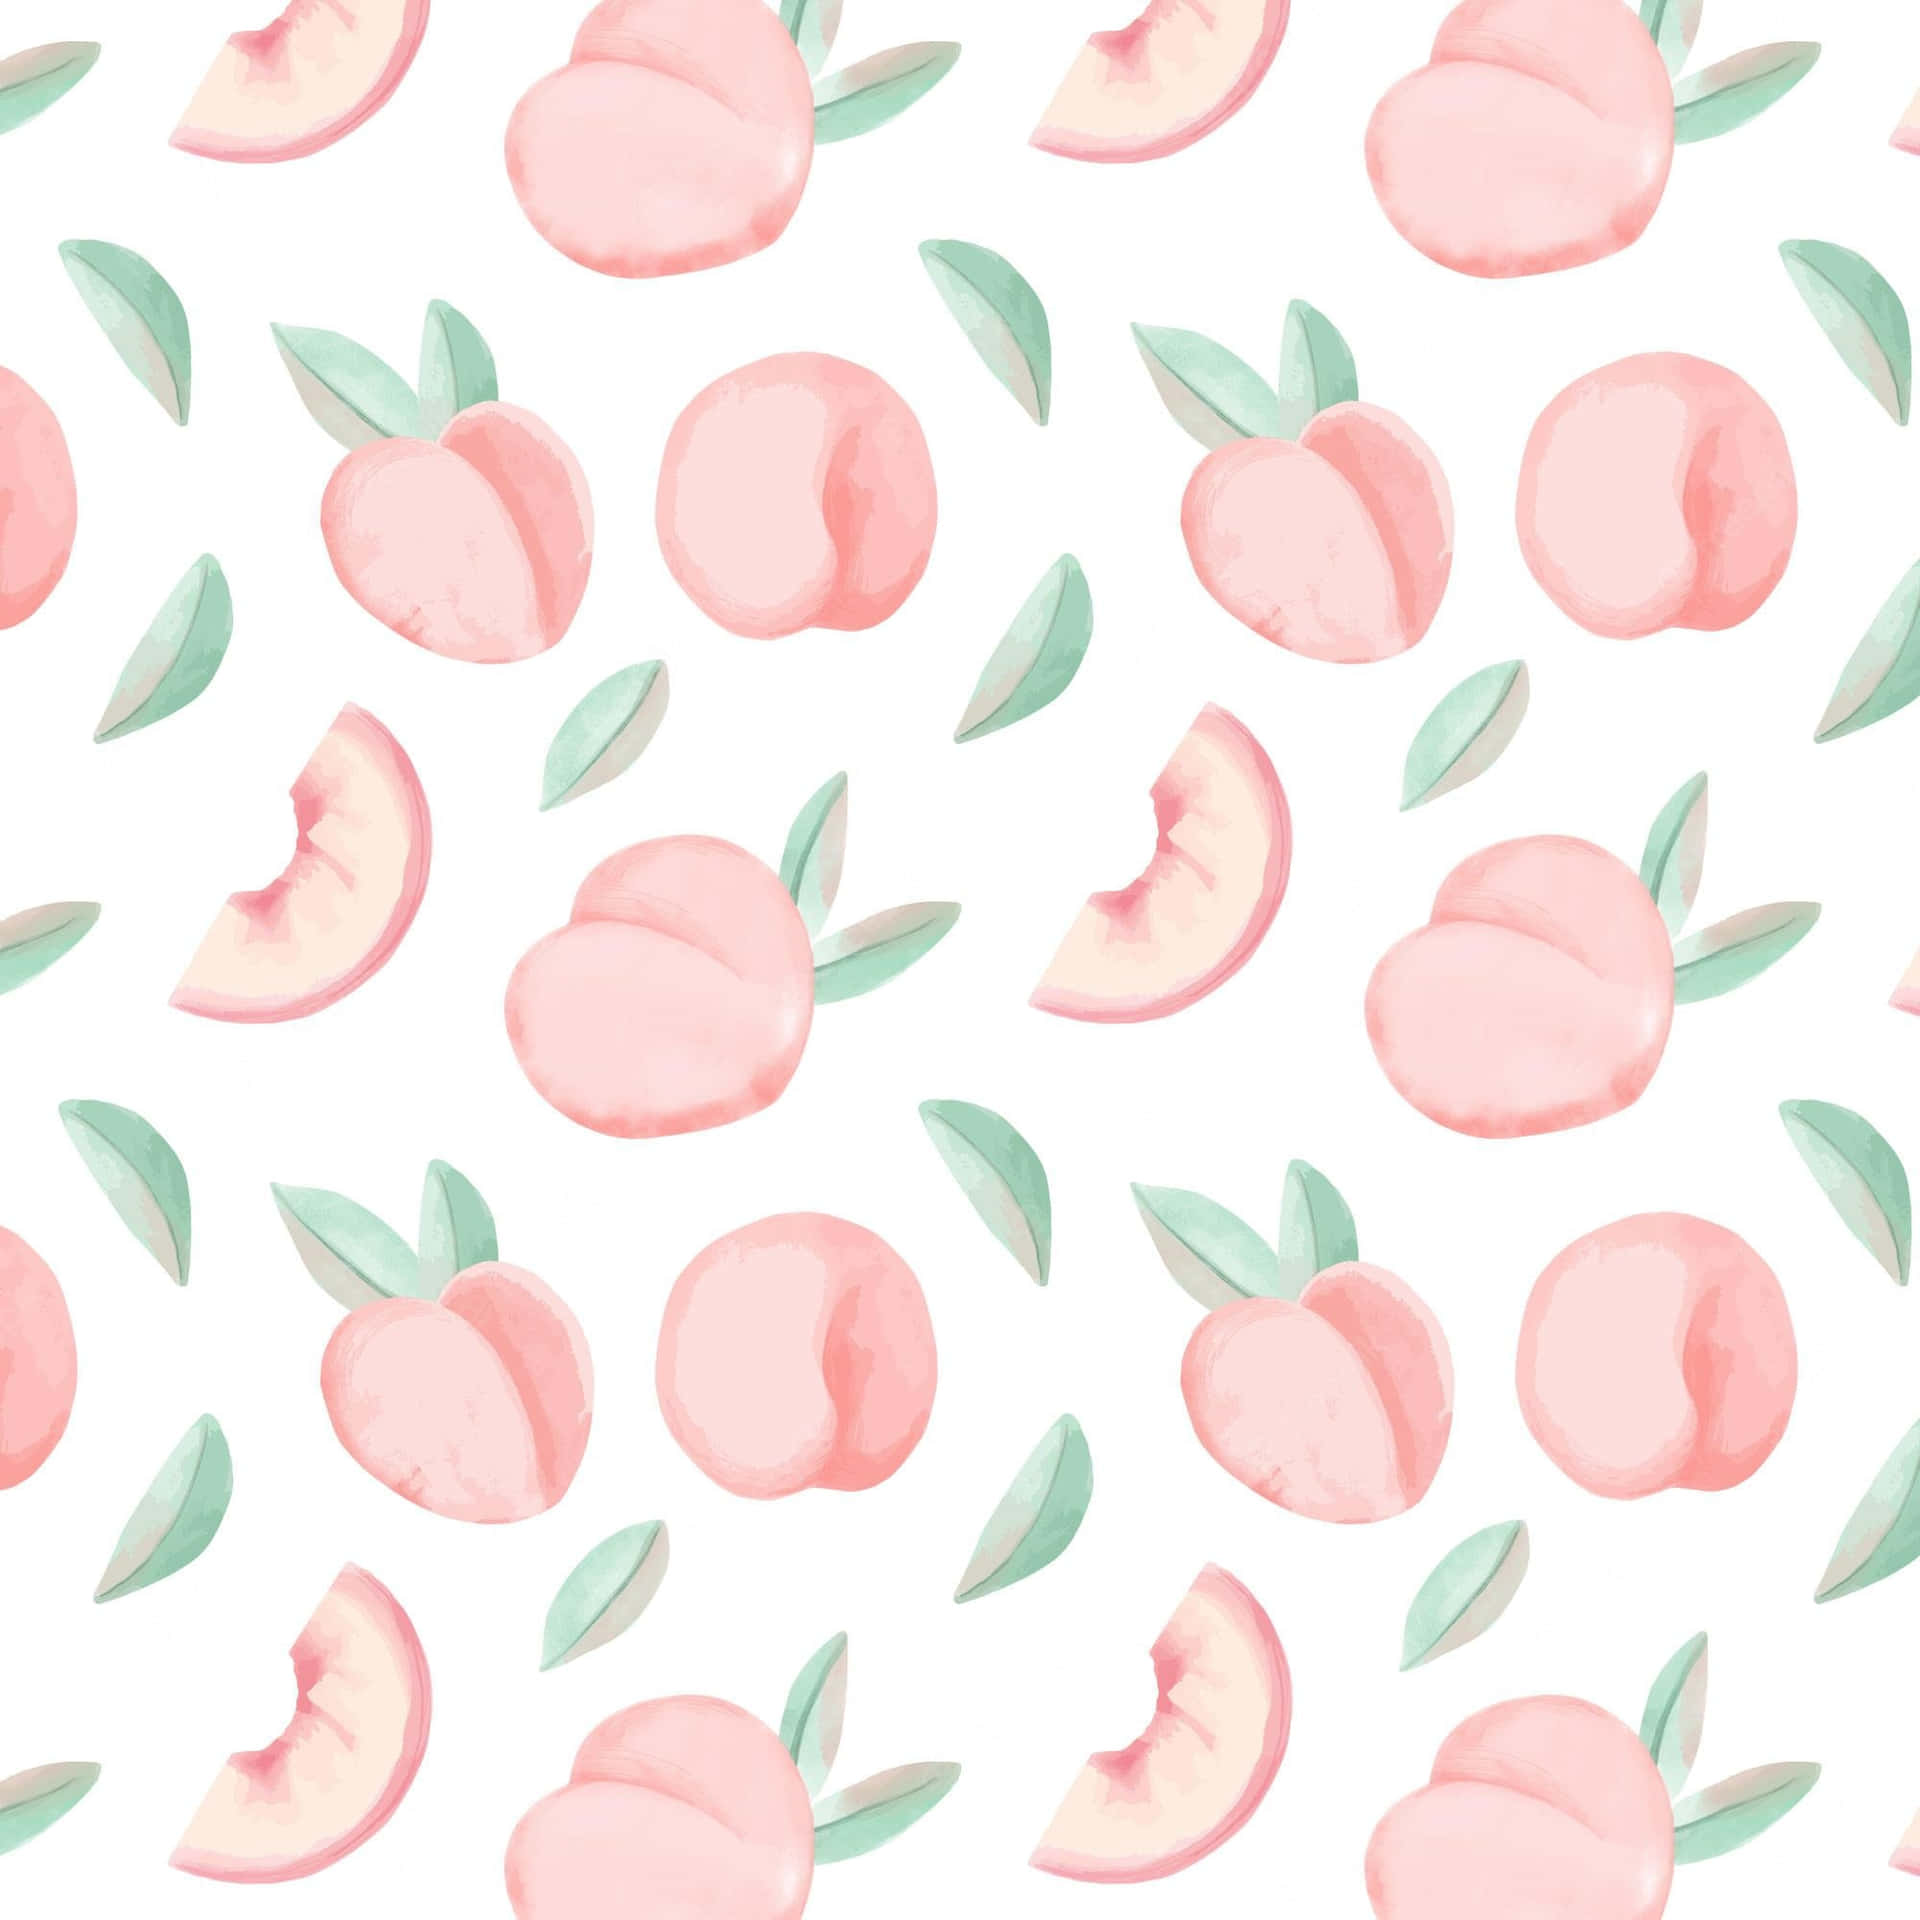 A deliciously ripe peach, just begging to be picked! Wallpaper